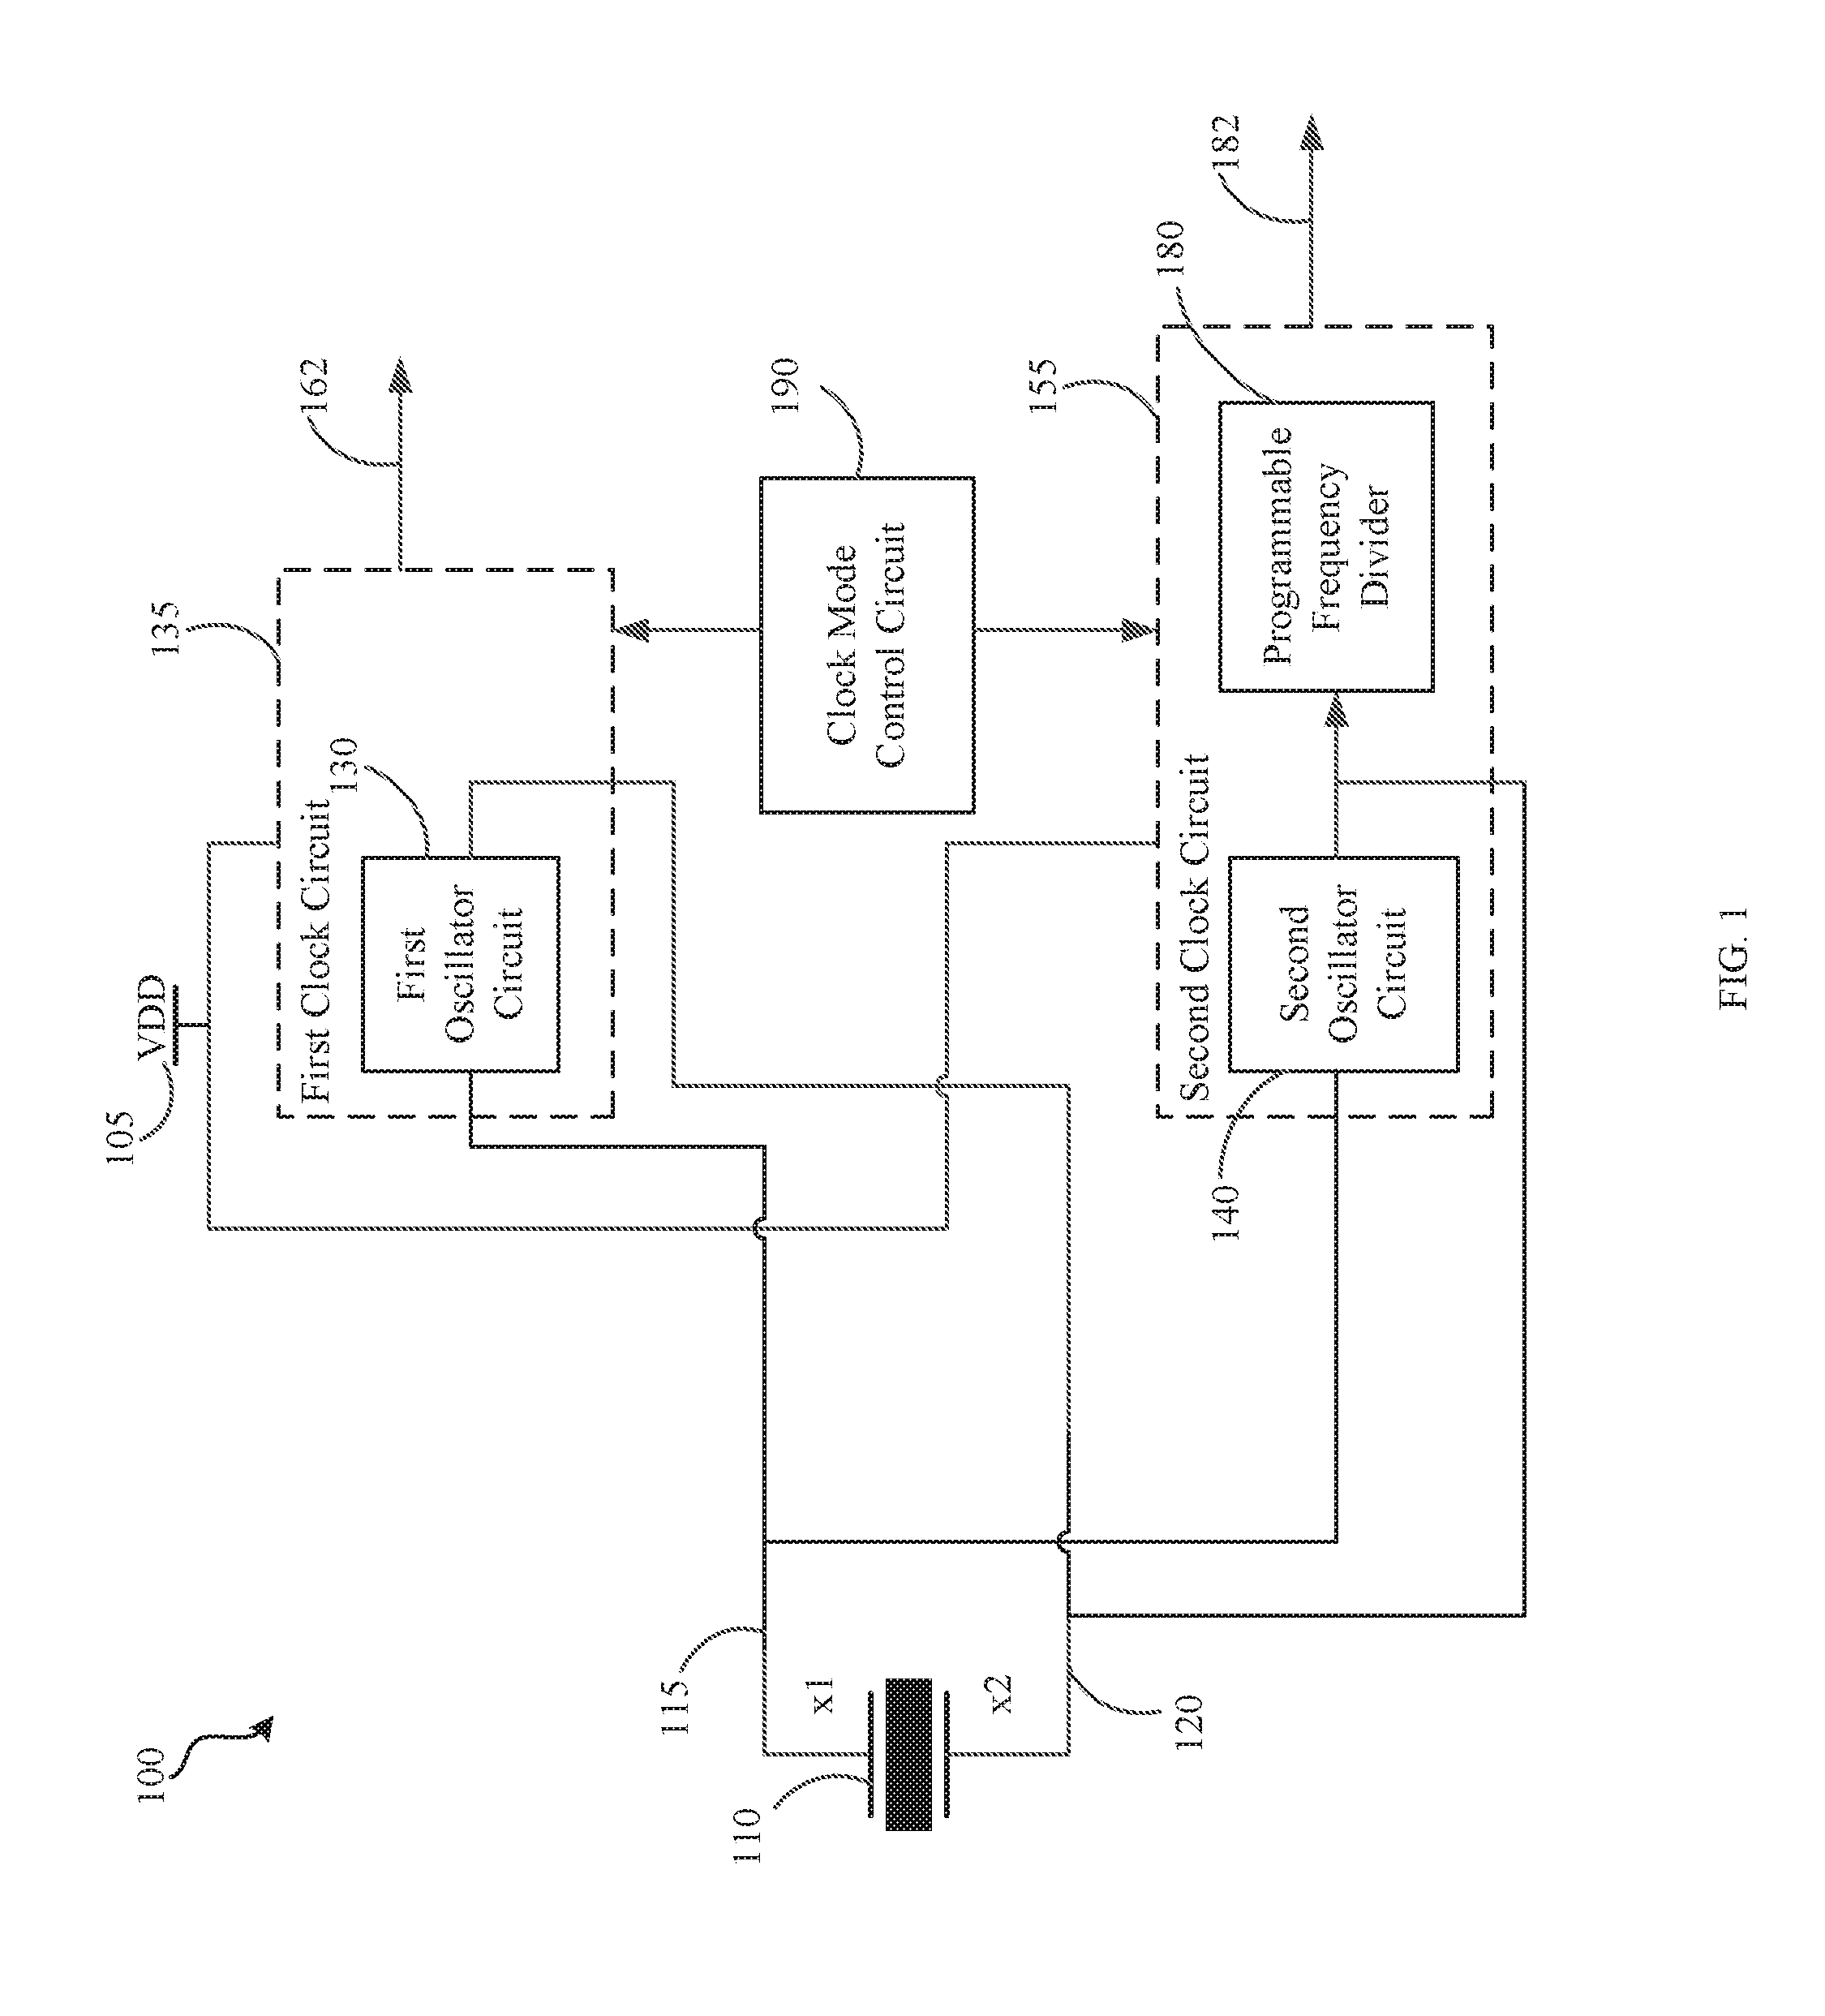 Dual mode clock using a common resonator and associated method of use